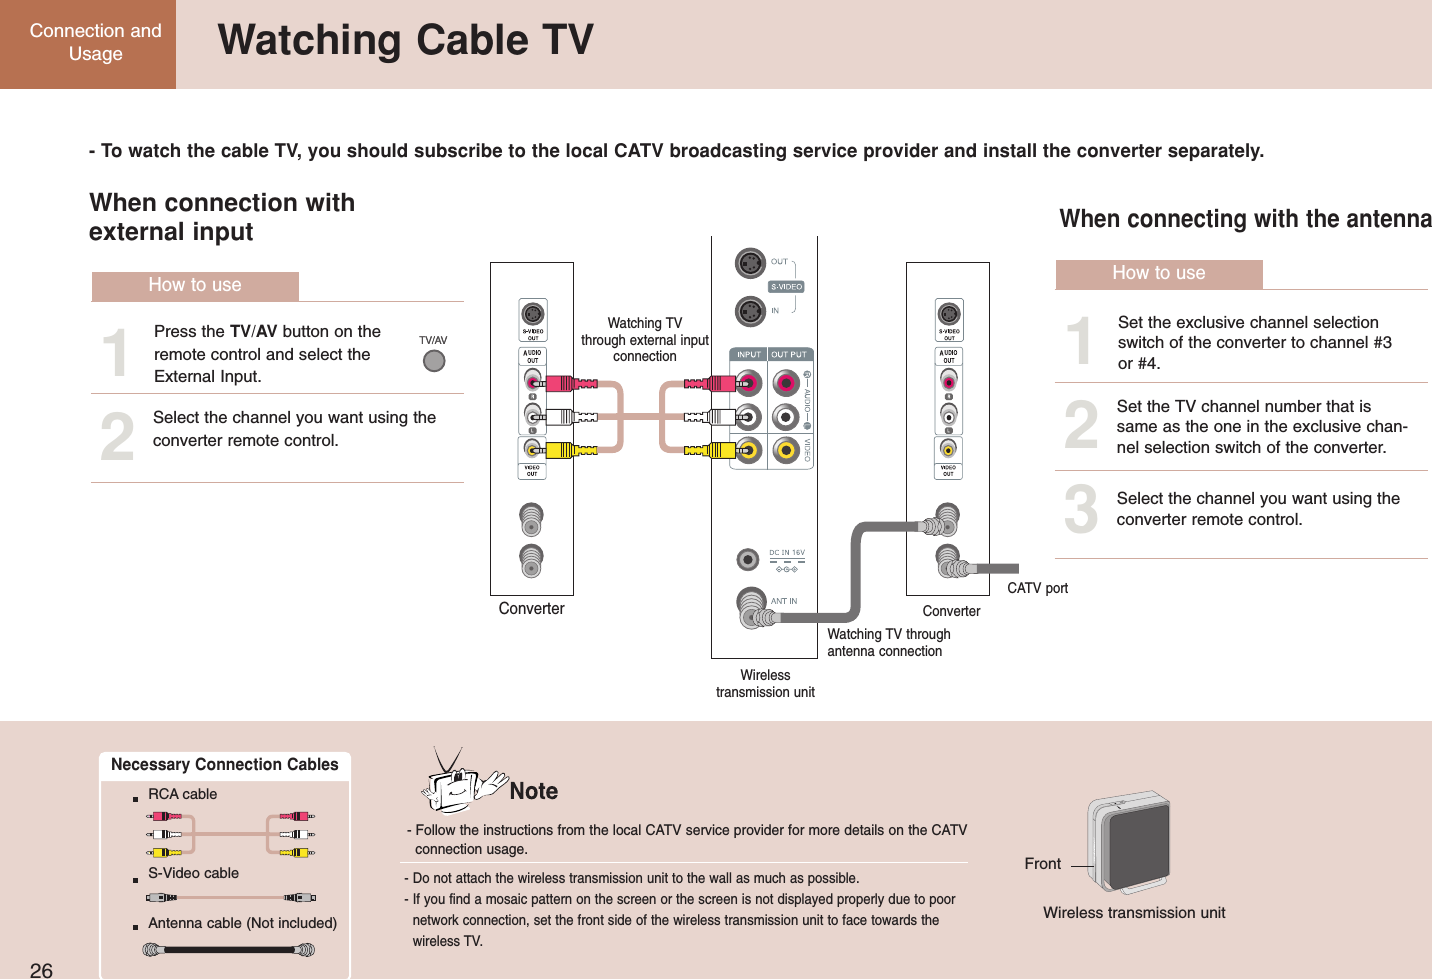 26Connection andUsage Watching Cable TV- Do not attach the wireless transmission unit to the wall as much as possible.- If you find a mosaic pattern on the screen or the screen is not displayed properly due to poornetwork connection, set the front side of the wireless transmission unit to face towards thewireless TV.- Follow the instructions from the local CATV service provider for more details on the CATV connection usage.Wireless transmission unitFrontNecessary Connection CablesRCA cableS-Video cableAntenna cable (Not included)- To watch the cable TV, you should subscribe to the local CATV broadcasting service provider and install the converter separately.When connection with external inputWhen connecting with the antennaPress the TV/AV button on theremote control and select theExternal Input.1Select the channel you want using theconverter remote control.2How to useSet the exclusive channel selectionswitch of the converter to channel #3or #4.1Set the TV channel number that issame as the one in the exclusive chan-nel selection switch of the converter.2Select the channel you want using theconverter remote control.3How to useWatching TV through external inputconnectionWatching TV throughantenna connectionCATV portConverterWireless transmission unit Converter